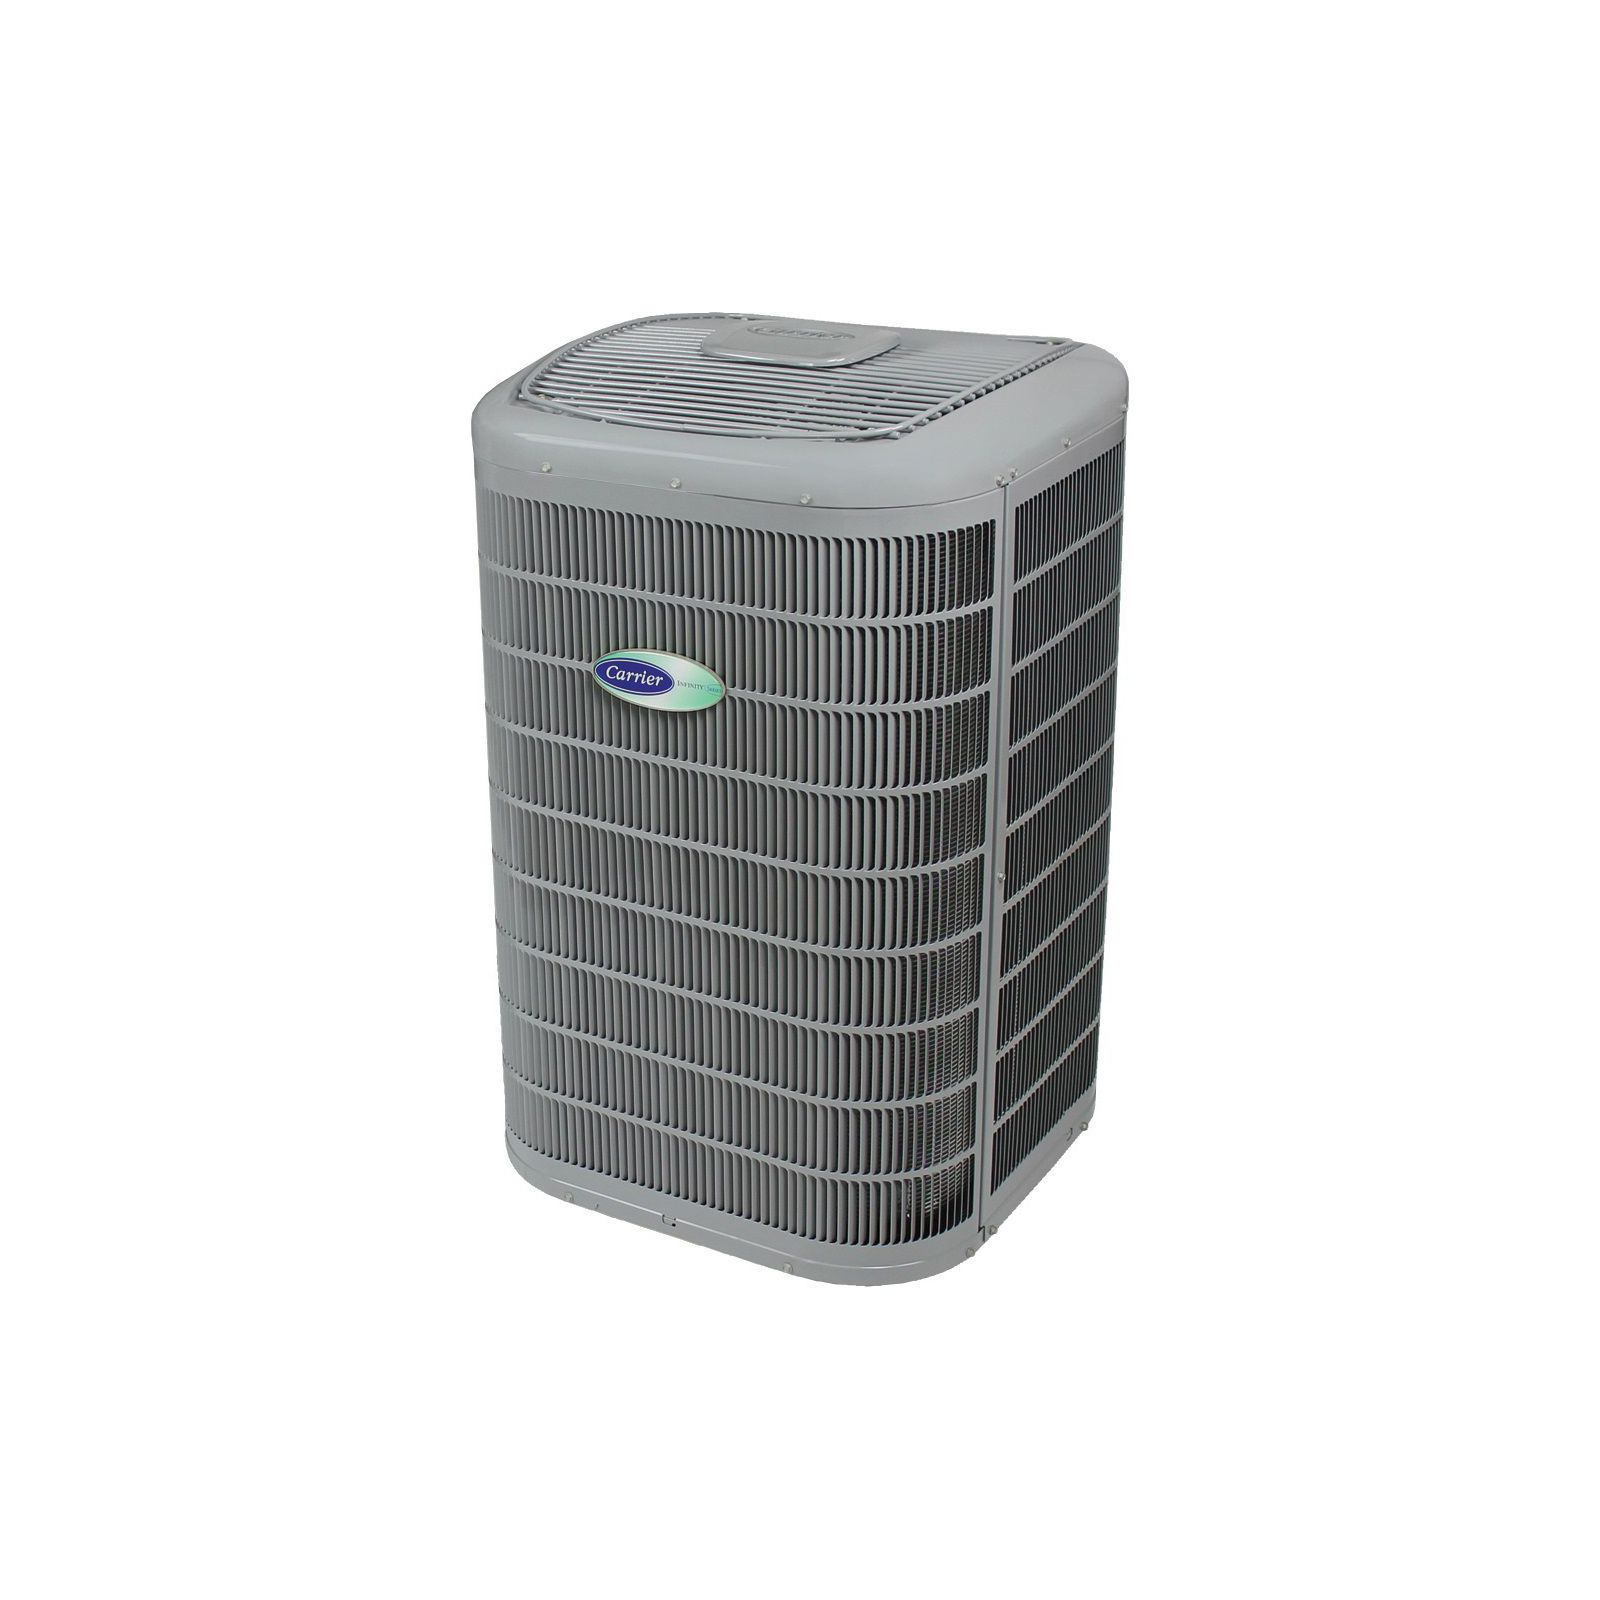 Carrier Infinity 4 Ton 20 Seer Residential Variable Speed Air Conditioner Condensing Unit With Greenspeed Intelligence Carrier Hvac